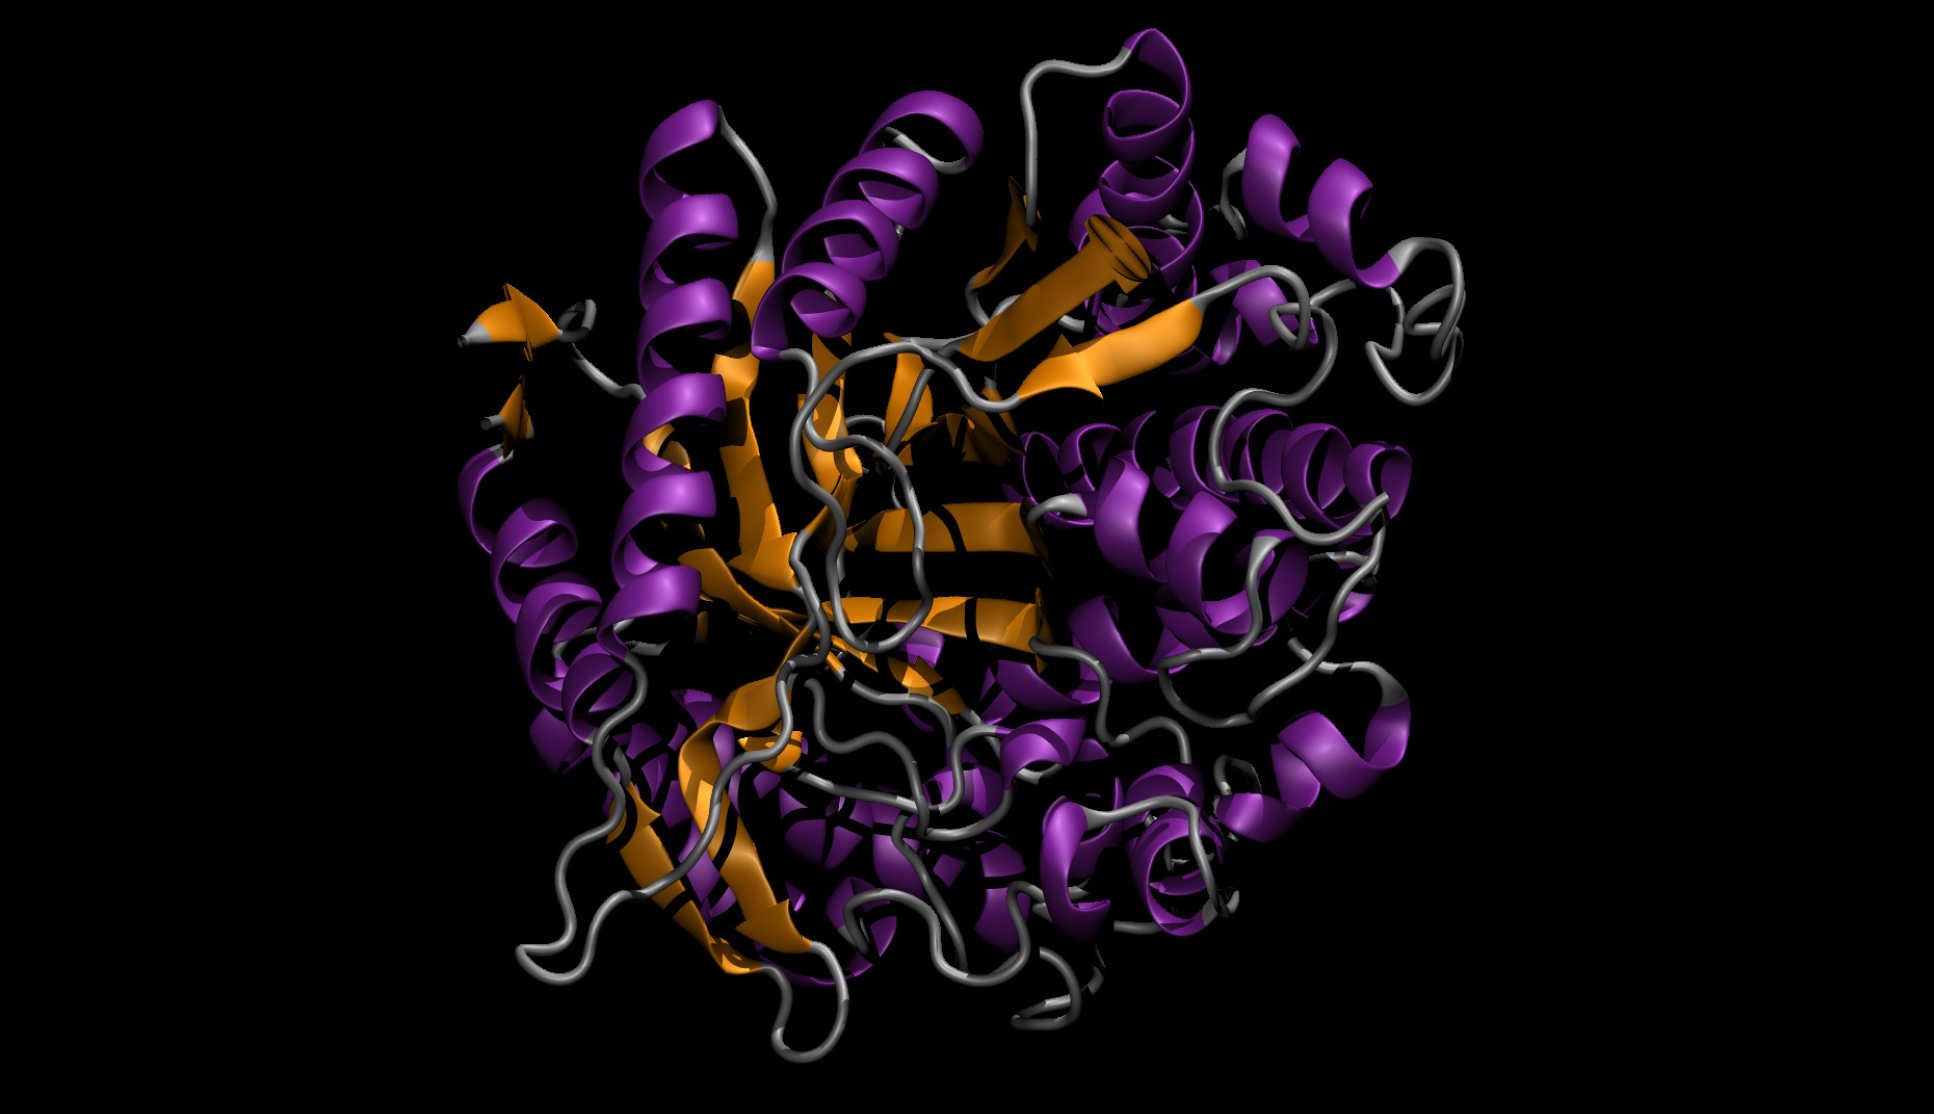 3D rendering of the glucosidase enzyme